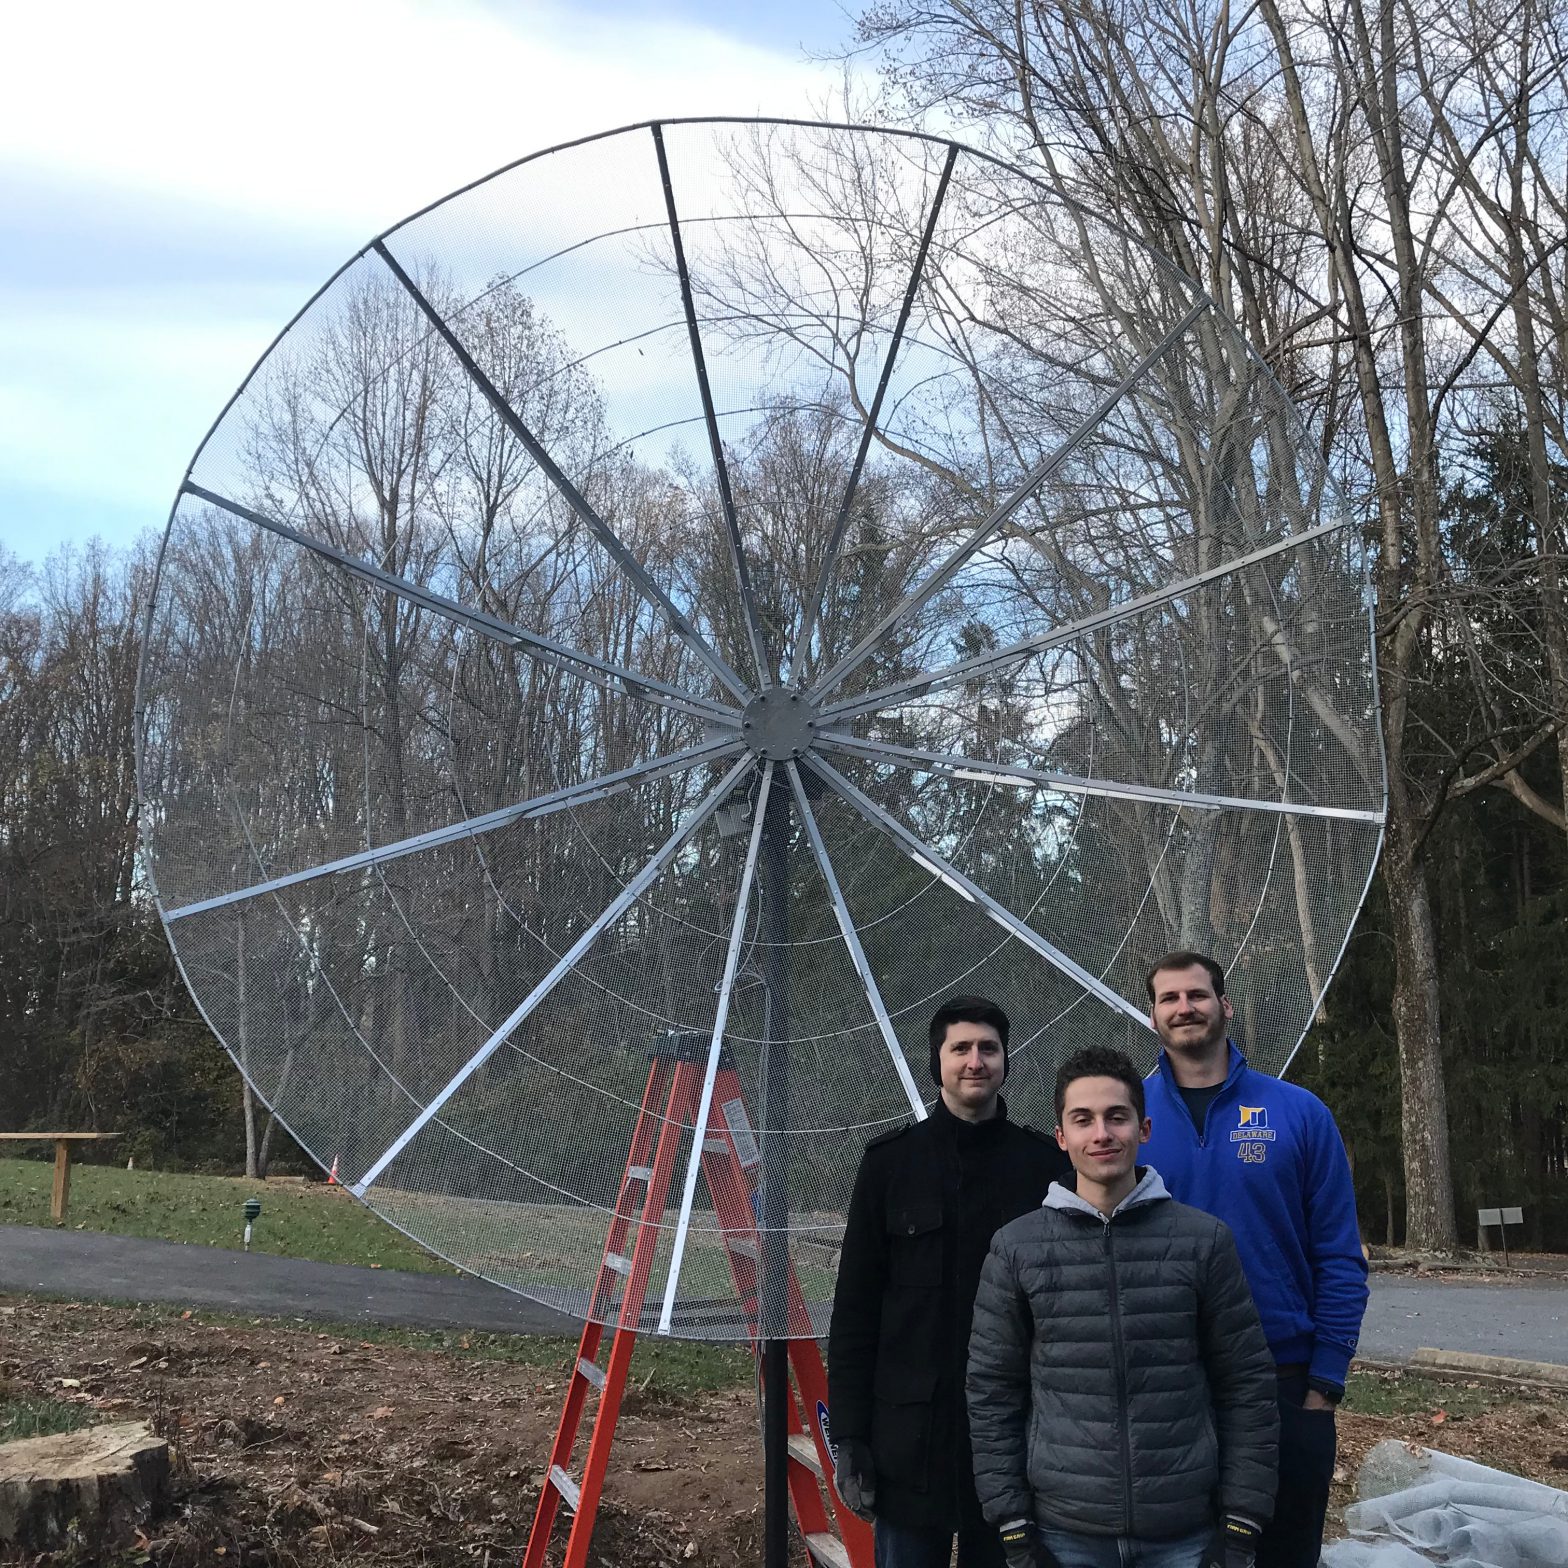 PI Bennett A. Maruca, Co-I Edward Campbell Graff, Jr., and Undergraduate Jeffrey Neumann after installing the 3-meter satellite dish for the University of Delaware CubeSat Ground Station at the Mt. Cuba Astronomical Observatory in Greenville, DE.